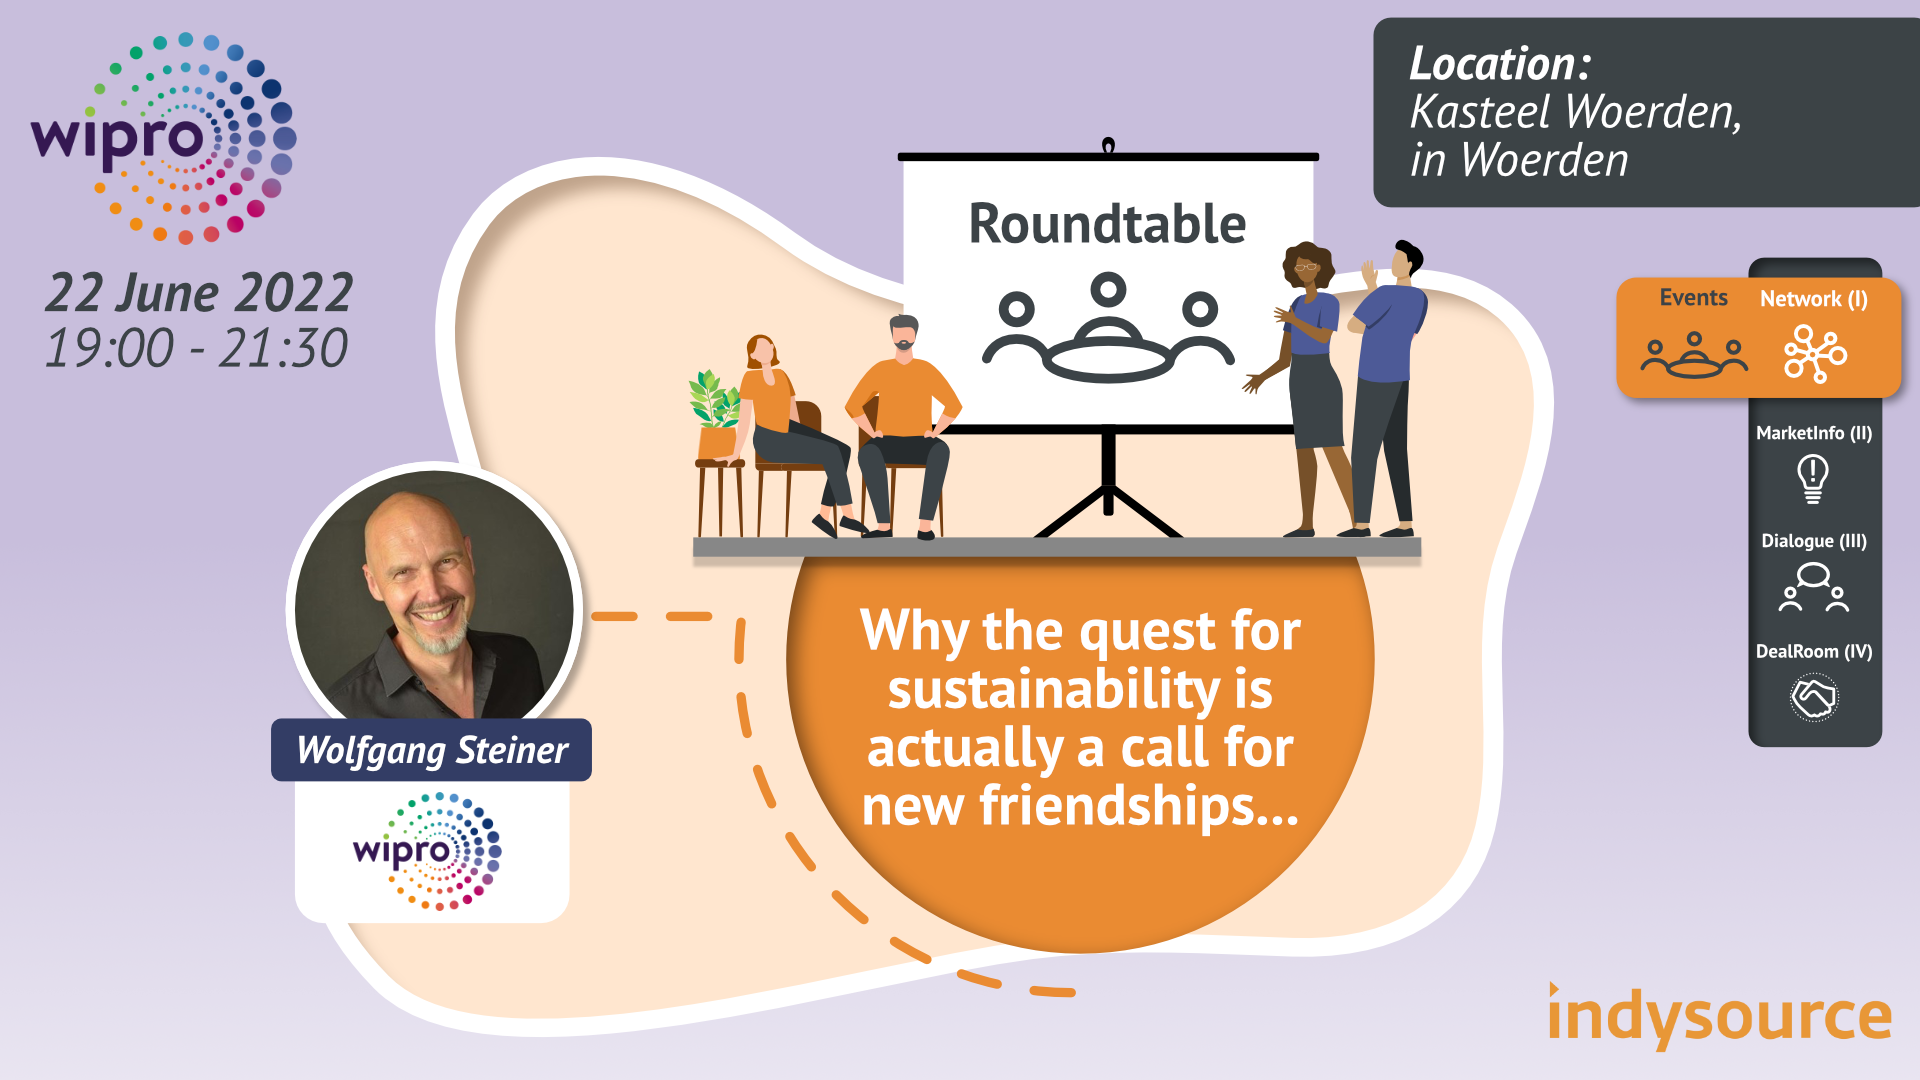 Why the quest for sustainability is actually a call for new friendships...